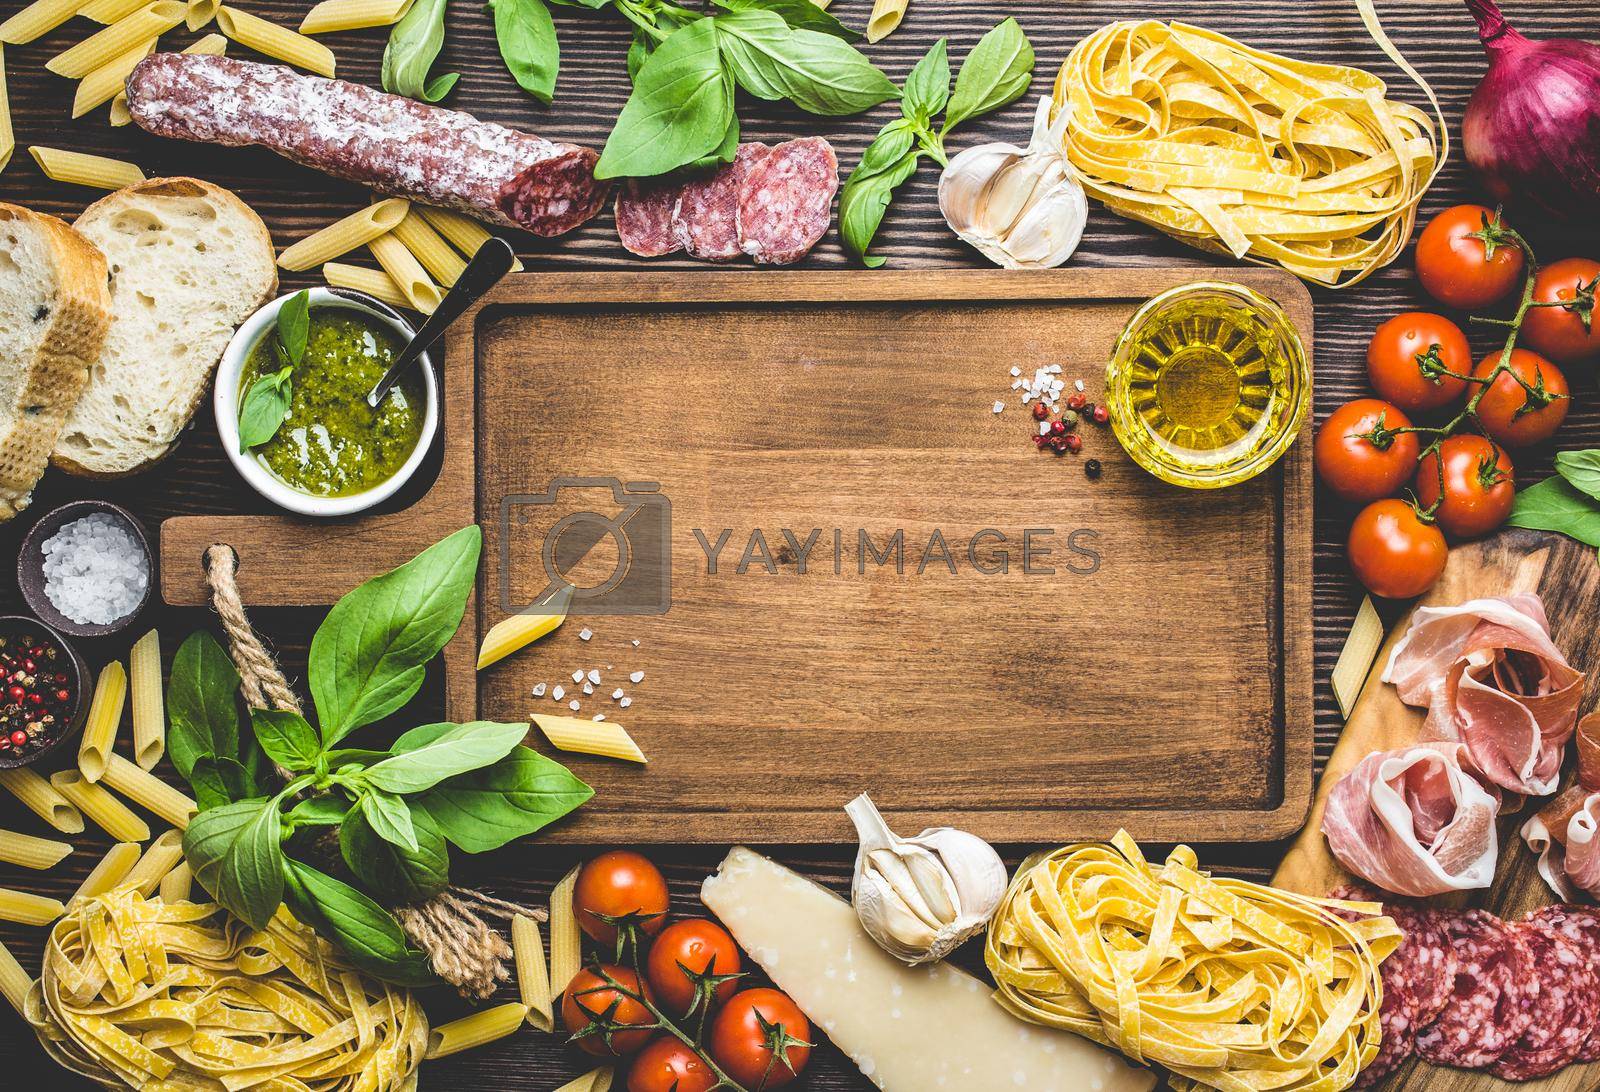 Top view of Italian traditional food, appetizers and snacks as salami, prosciutto, cheese, pesto, ciabatta, olive oil, pasta on rustic wooden board with space for text and retro style